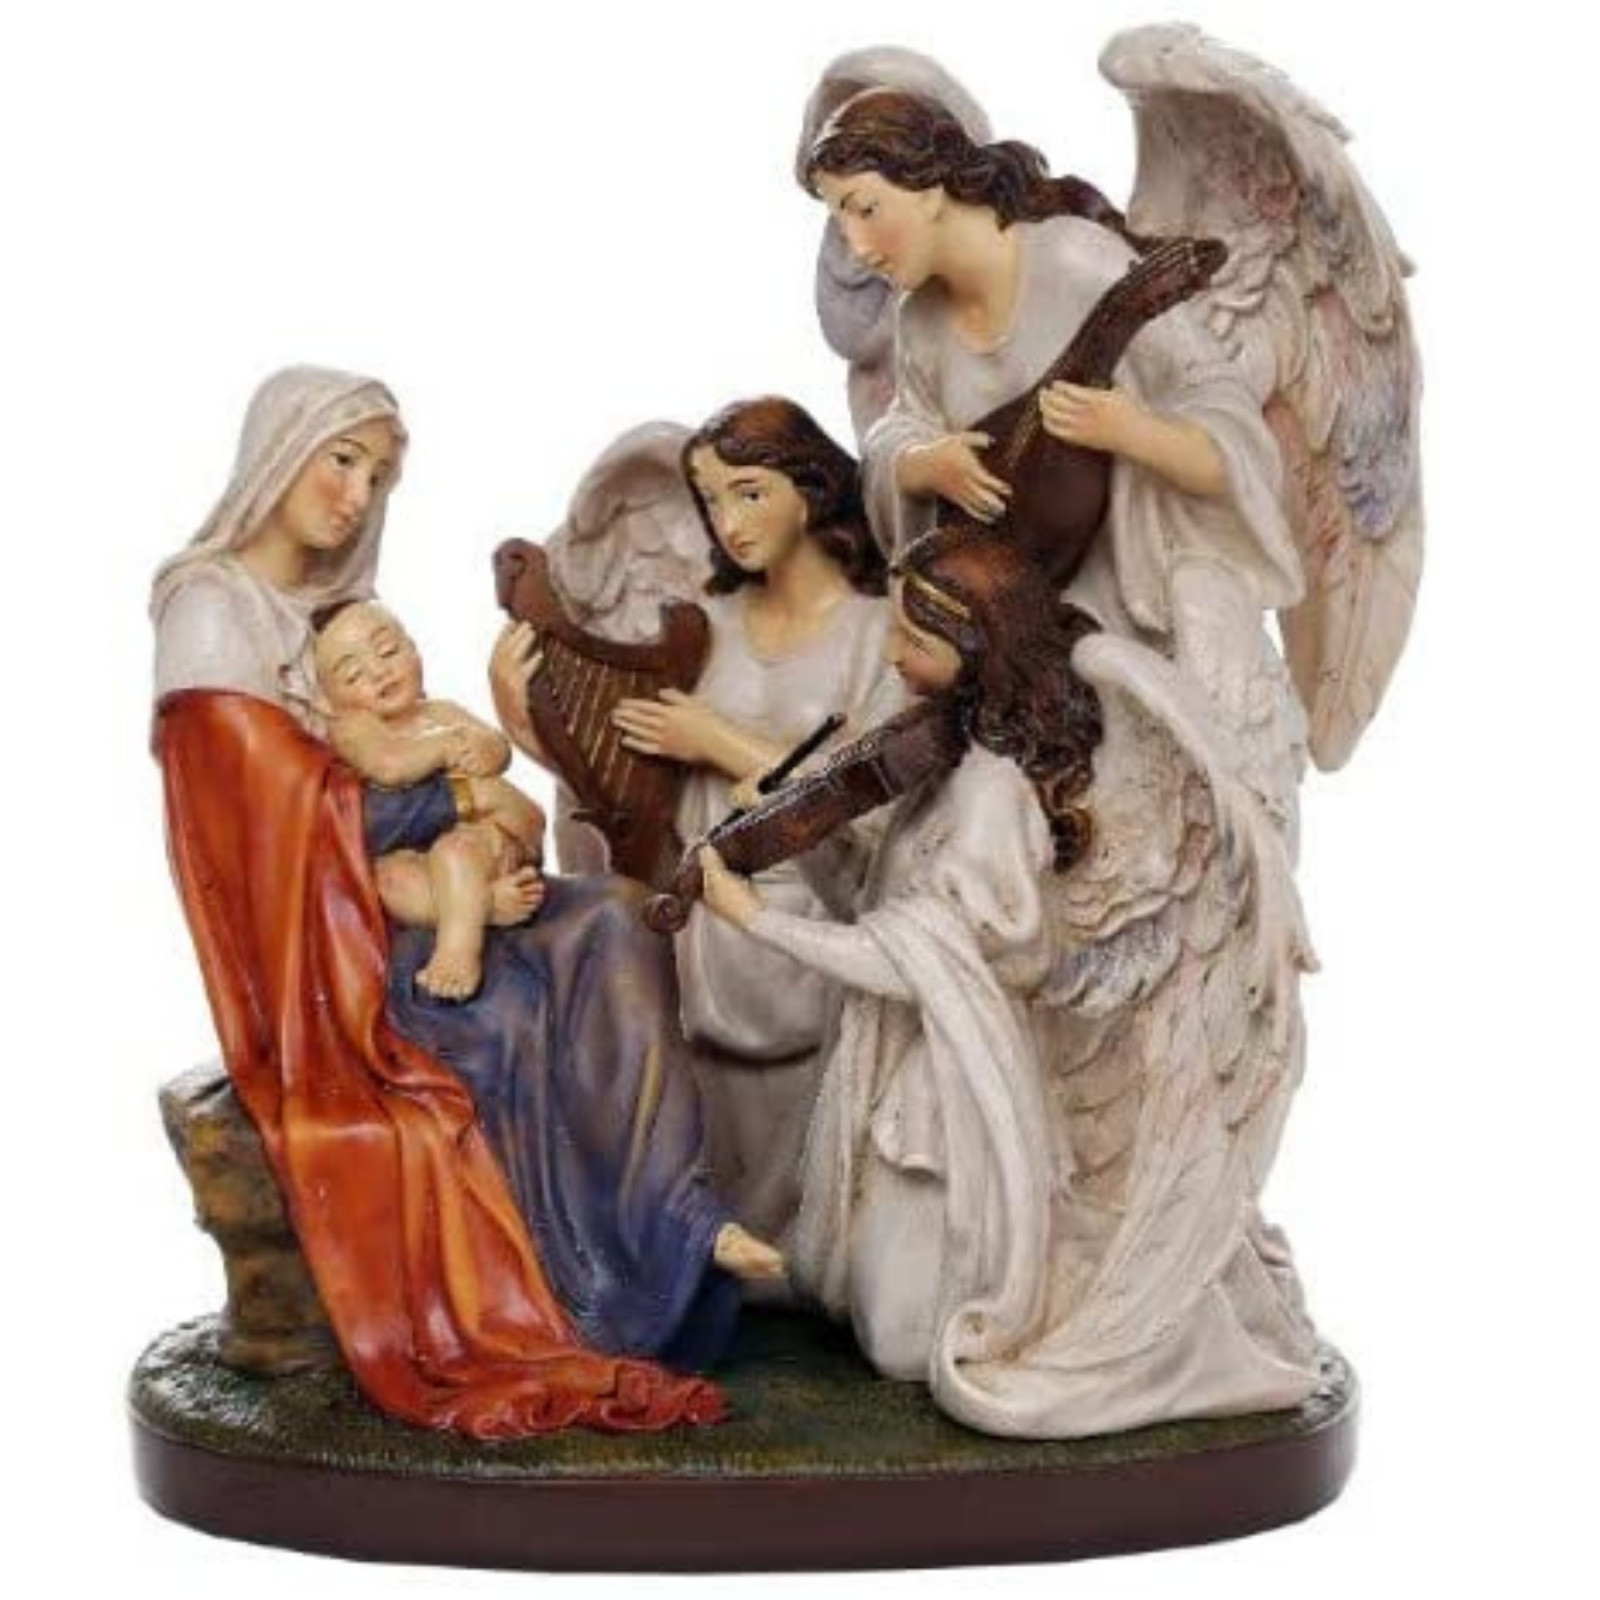 The Blessed Virgin Mary & The Song of The Angels Figurine Religious Sculpture